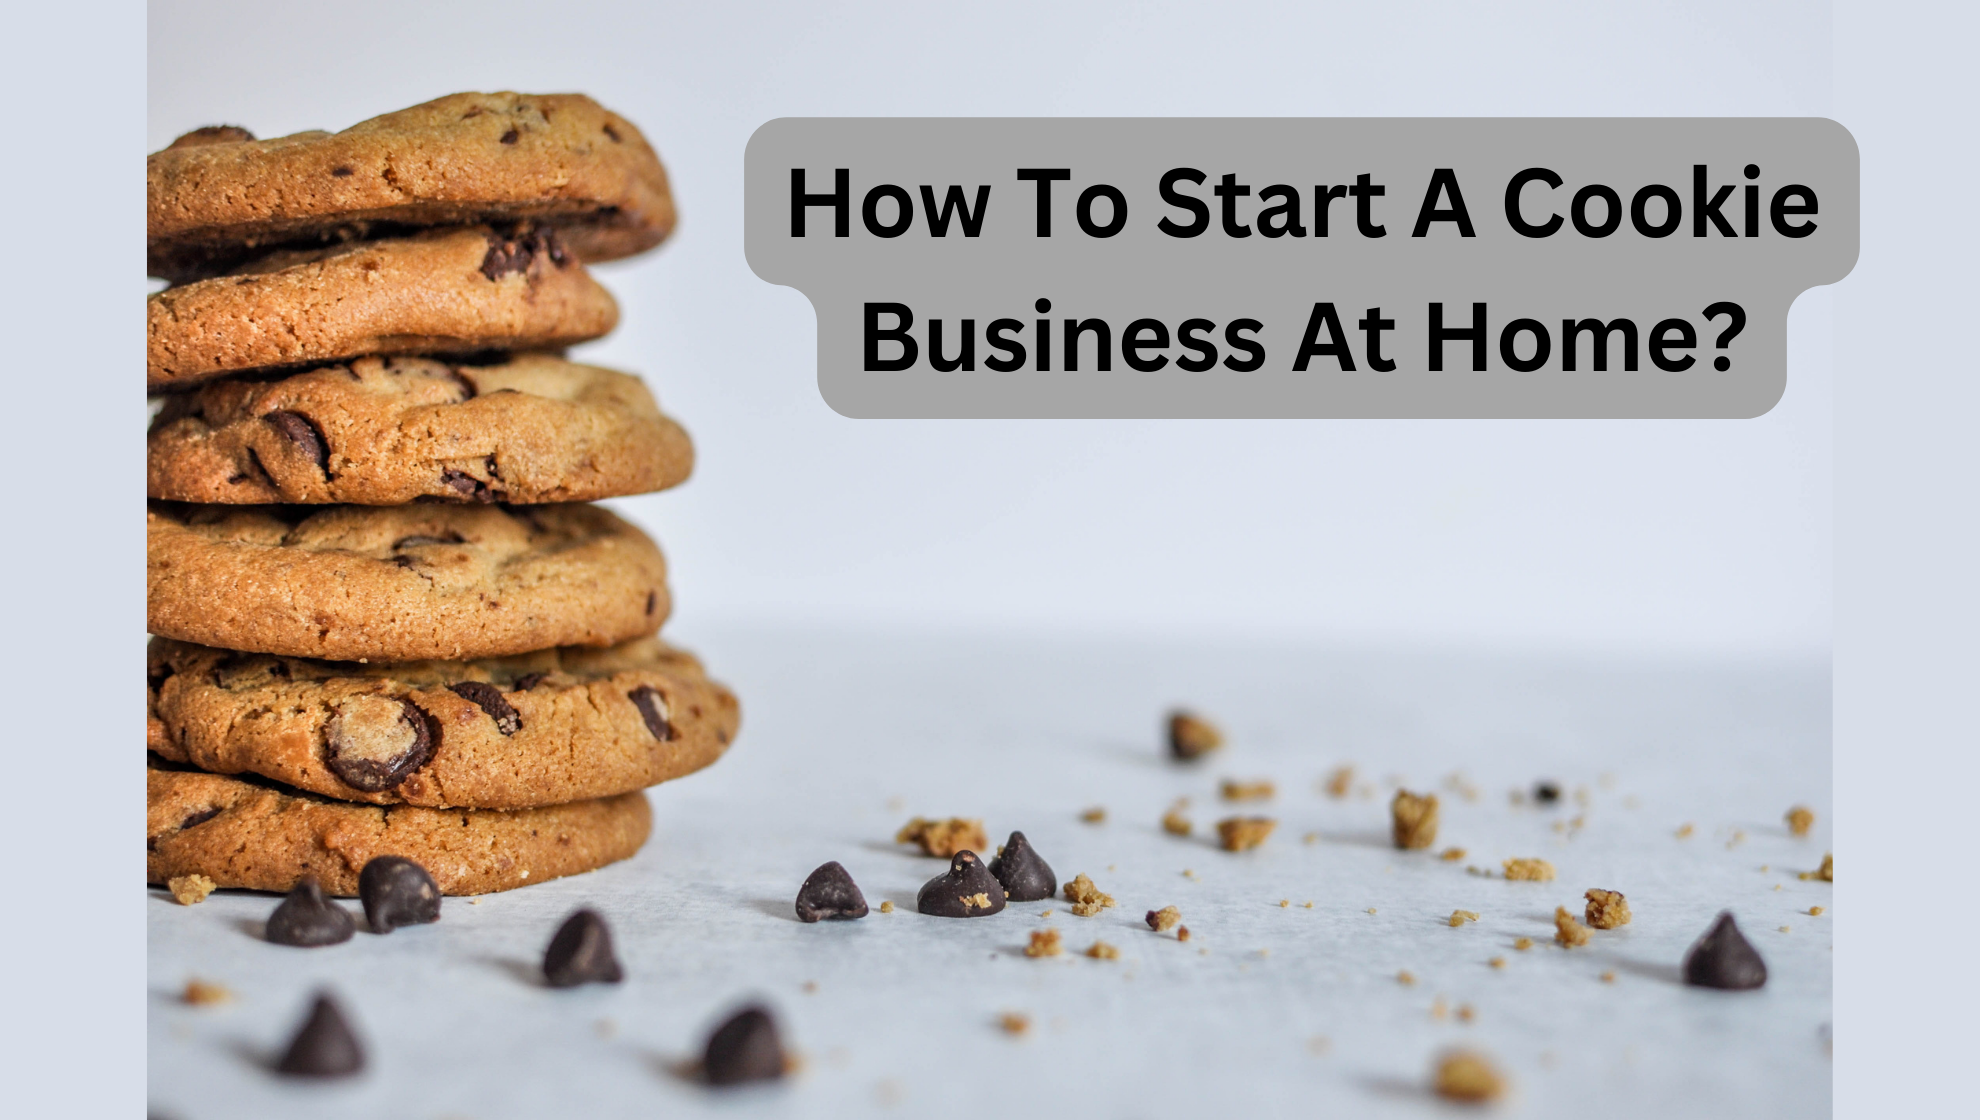 How To Start A Cookie Business At Home?